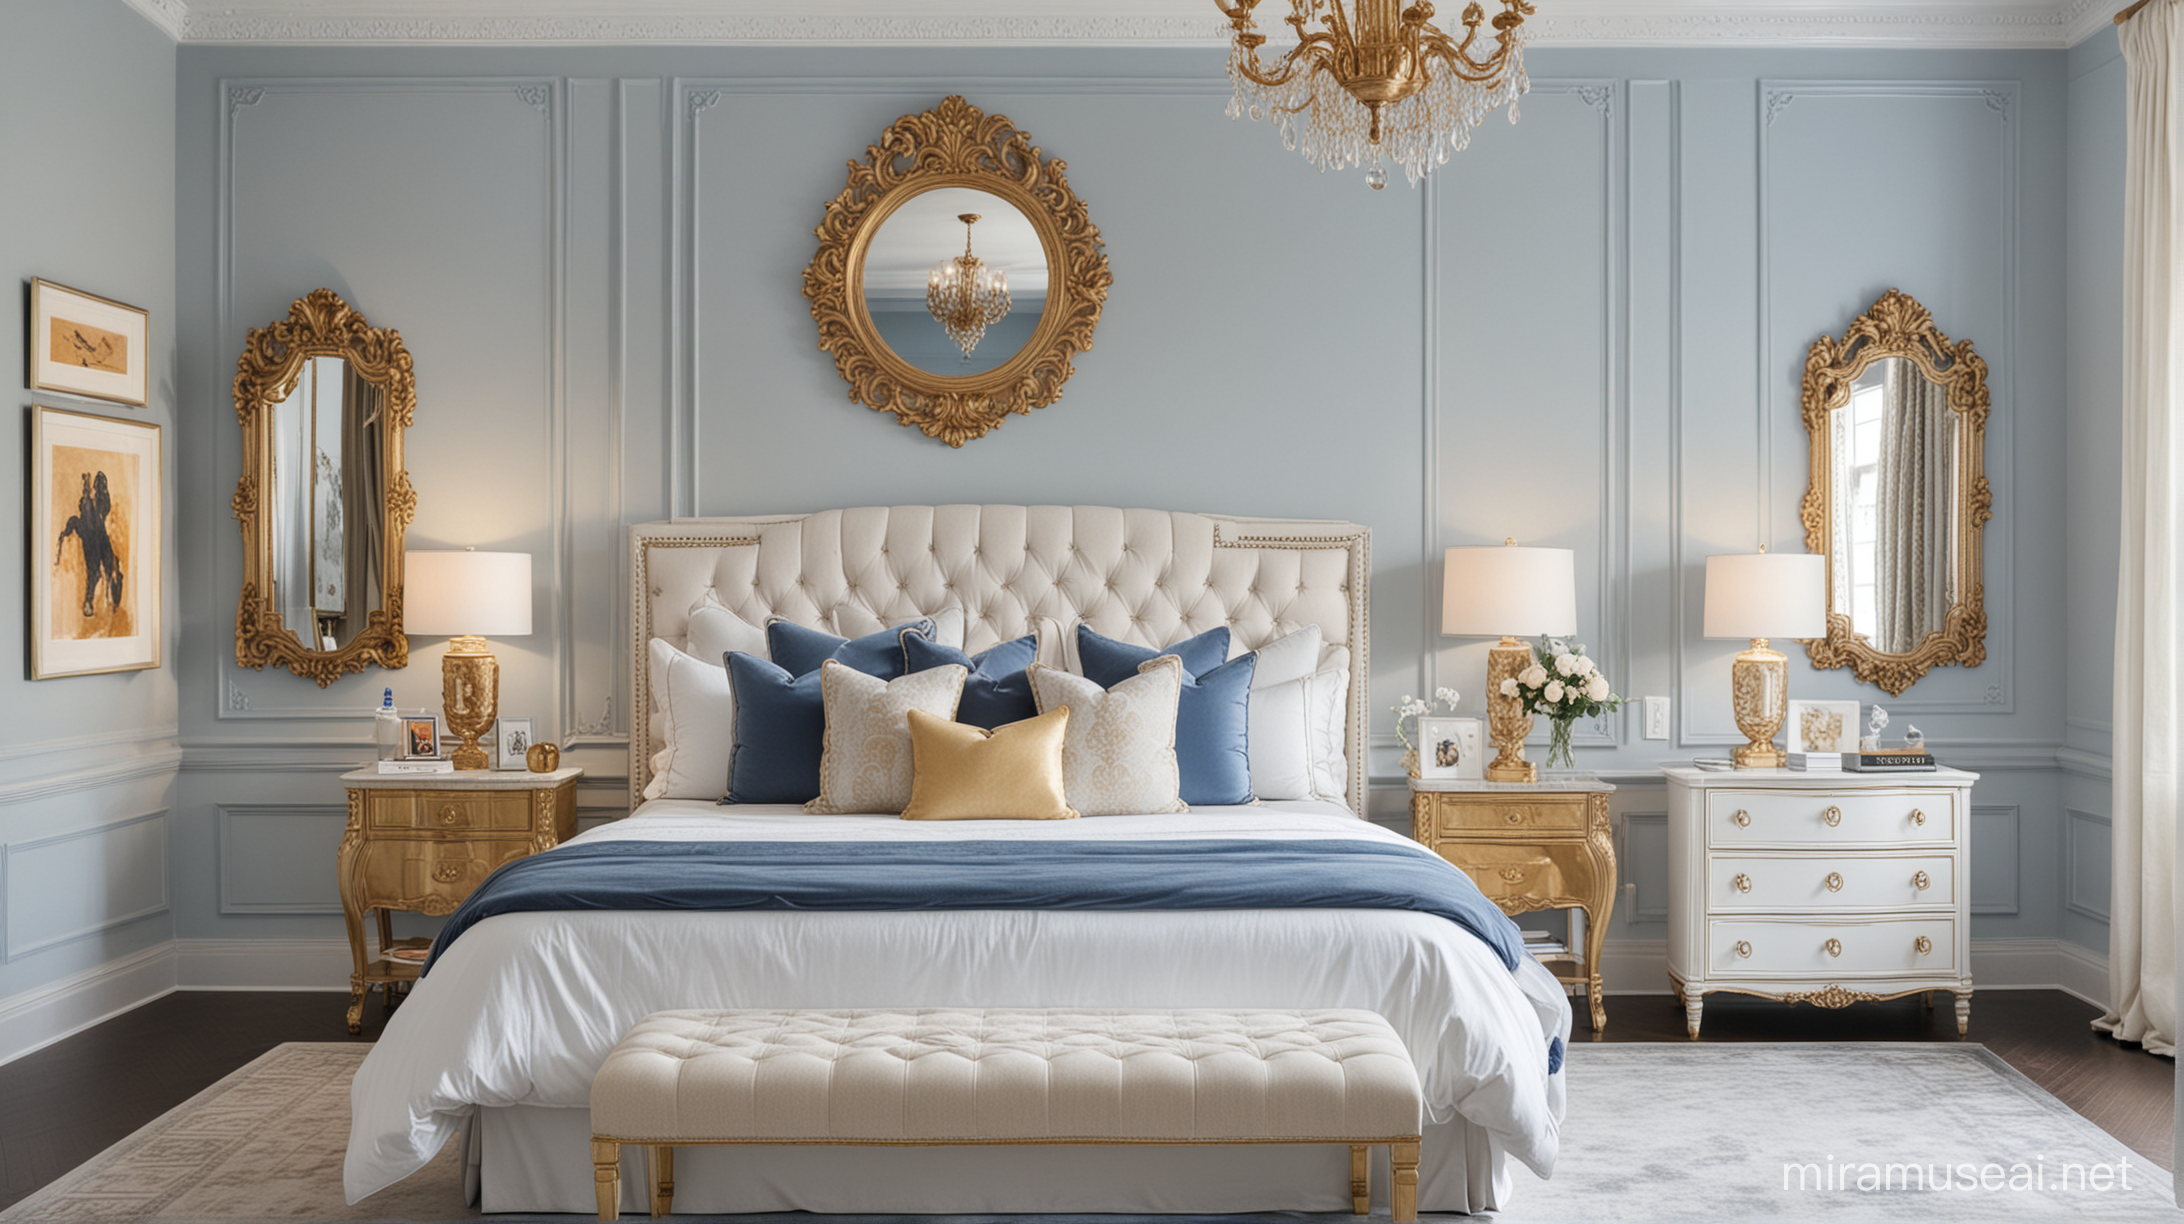 10'x10' Parisian modern bedroom with queen bed, ornate wall moldings and modern art behind the bed, and in a white, gold, and French blue palette. 